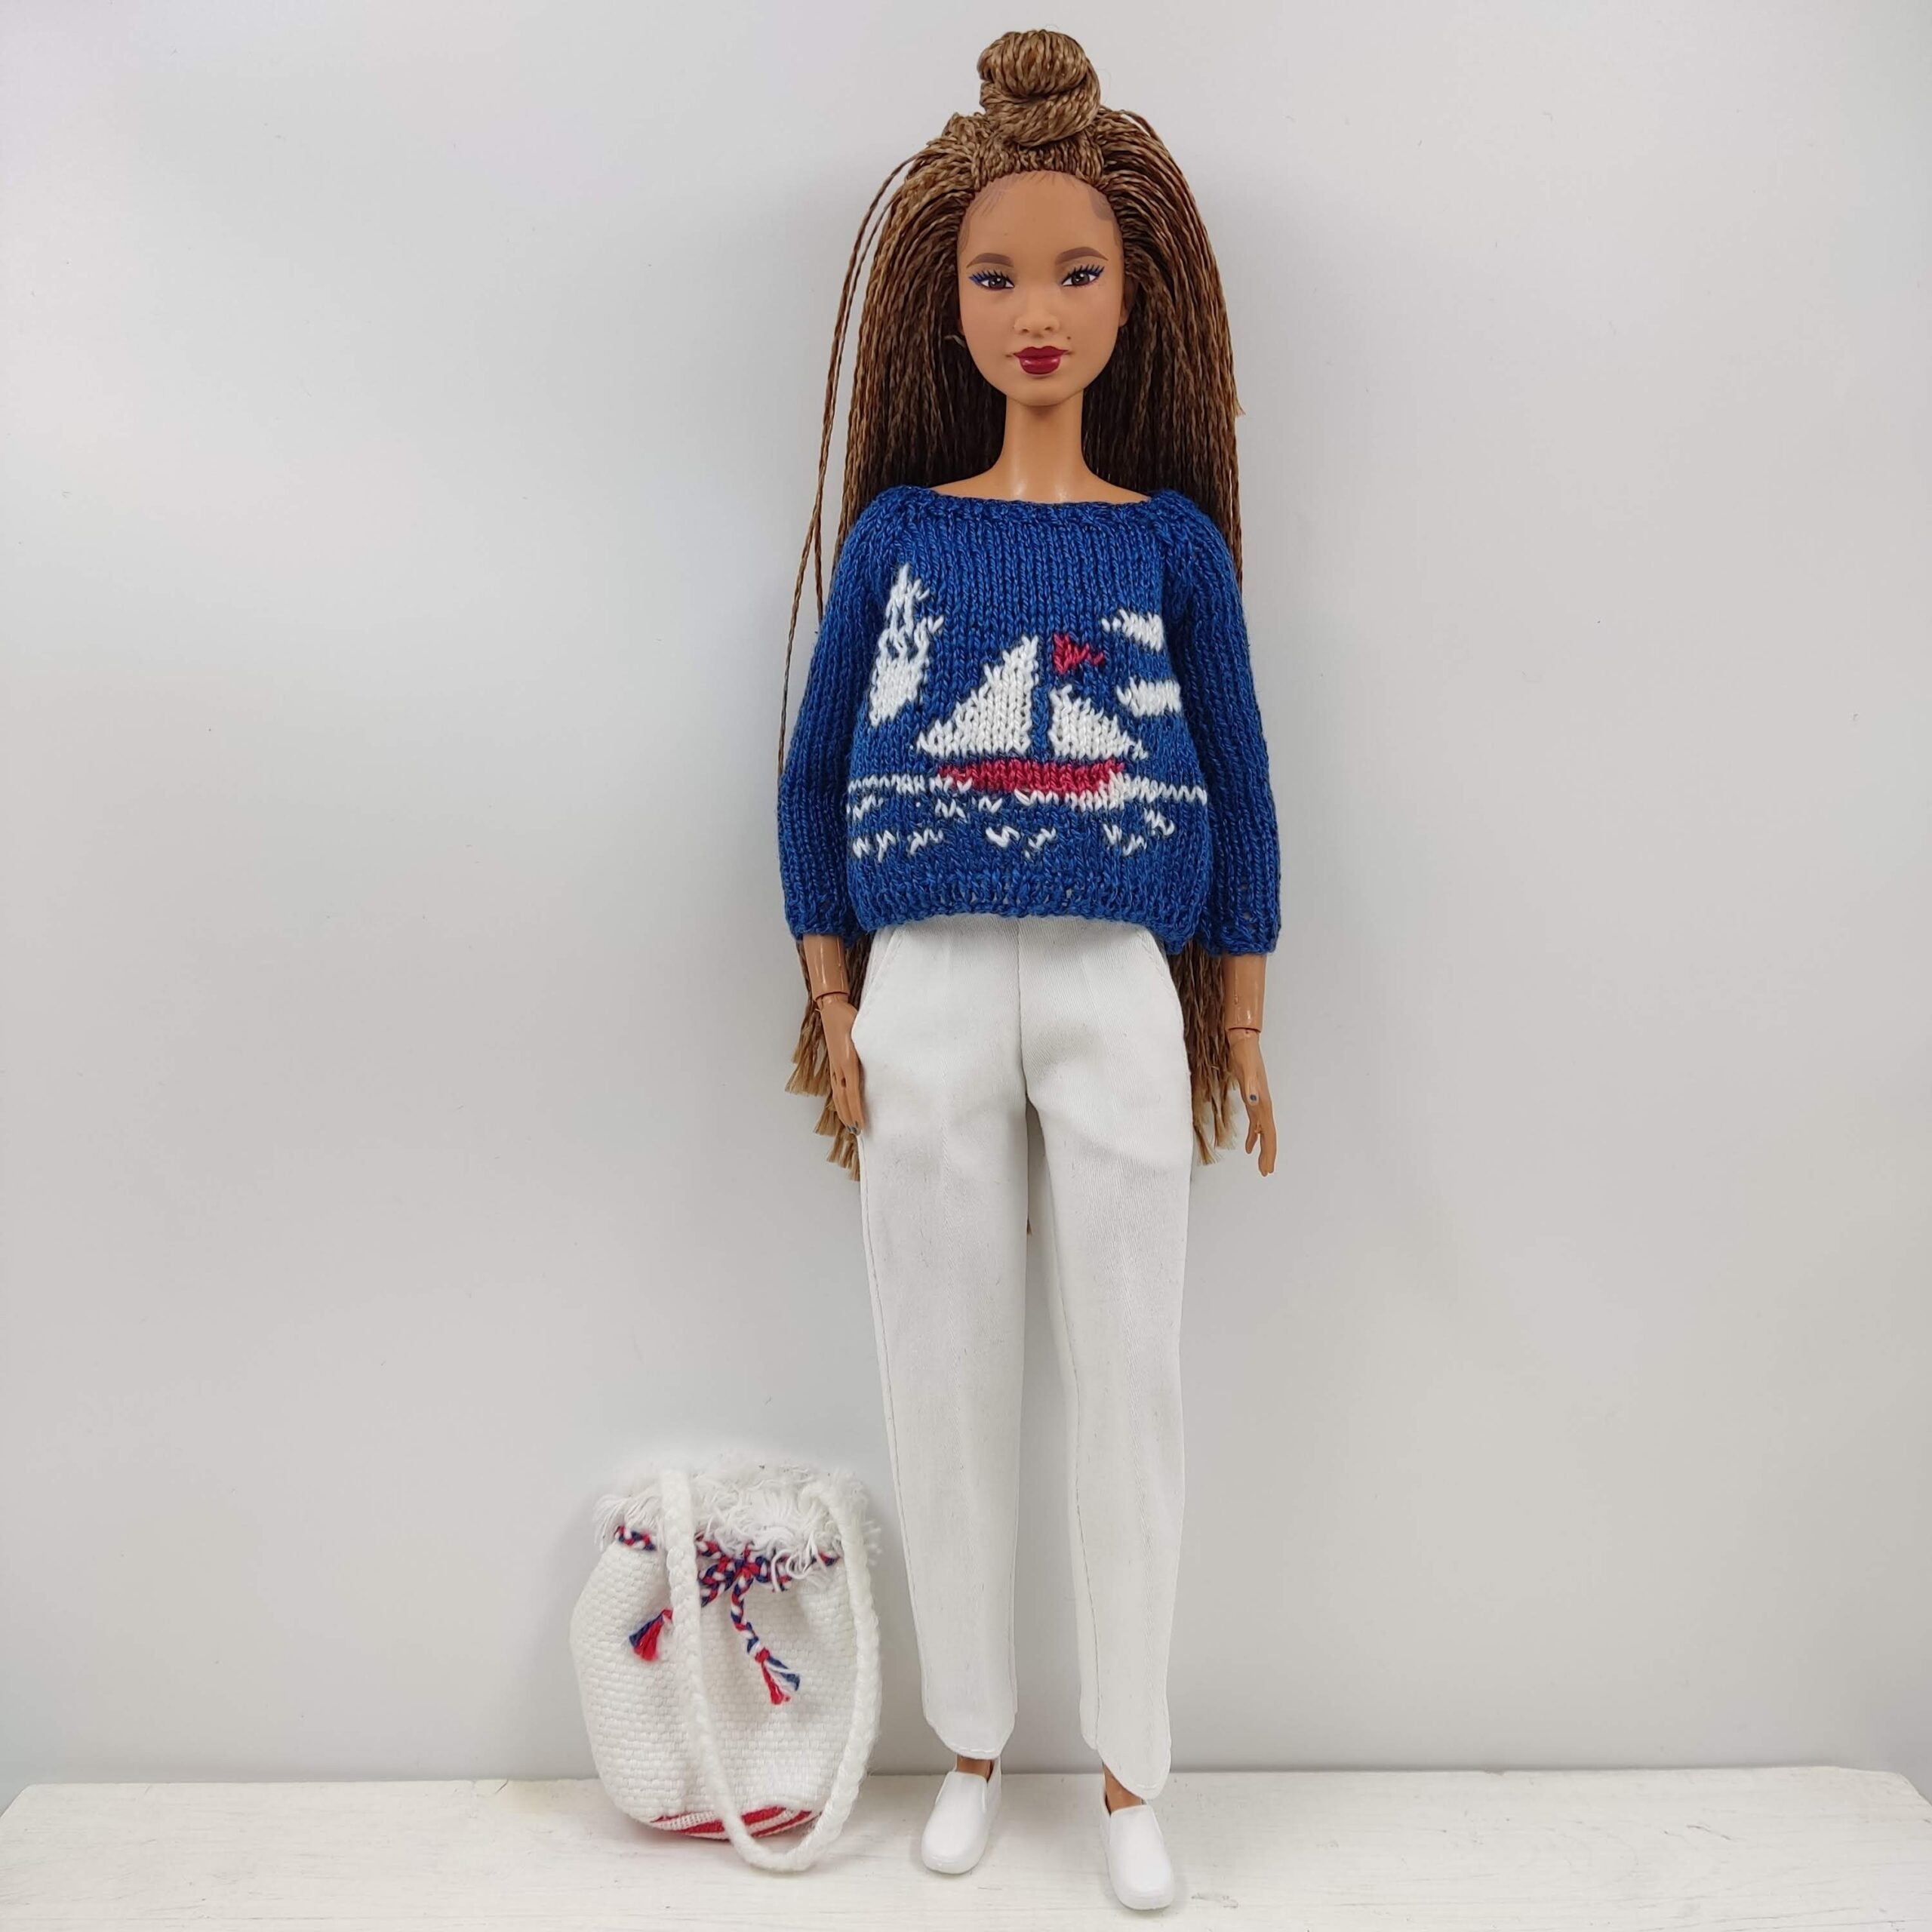 barbie-doll-clothes-from-vikukushop-barbie-ship-sweater